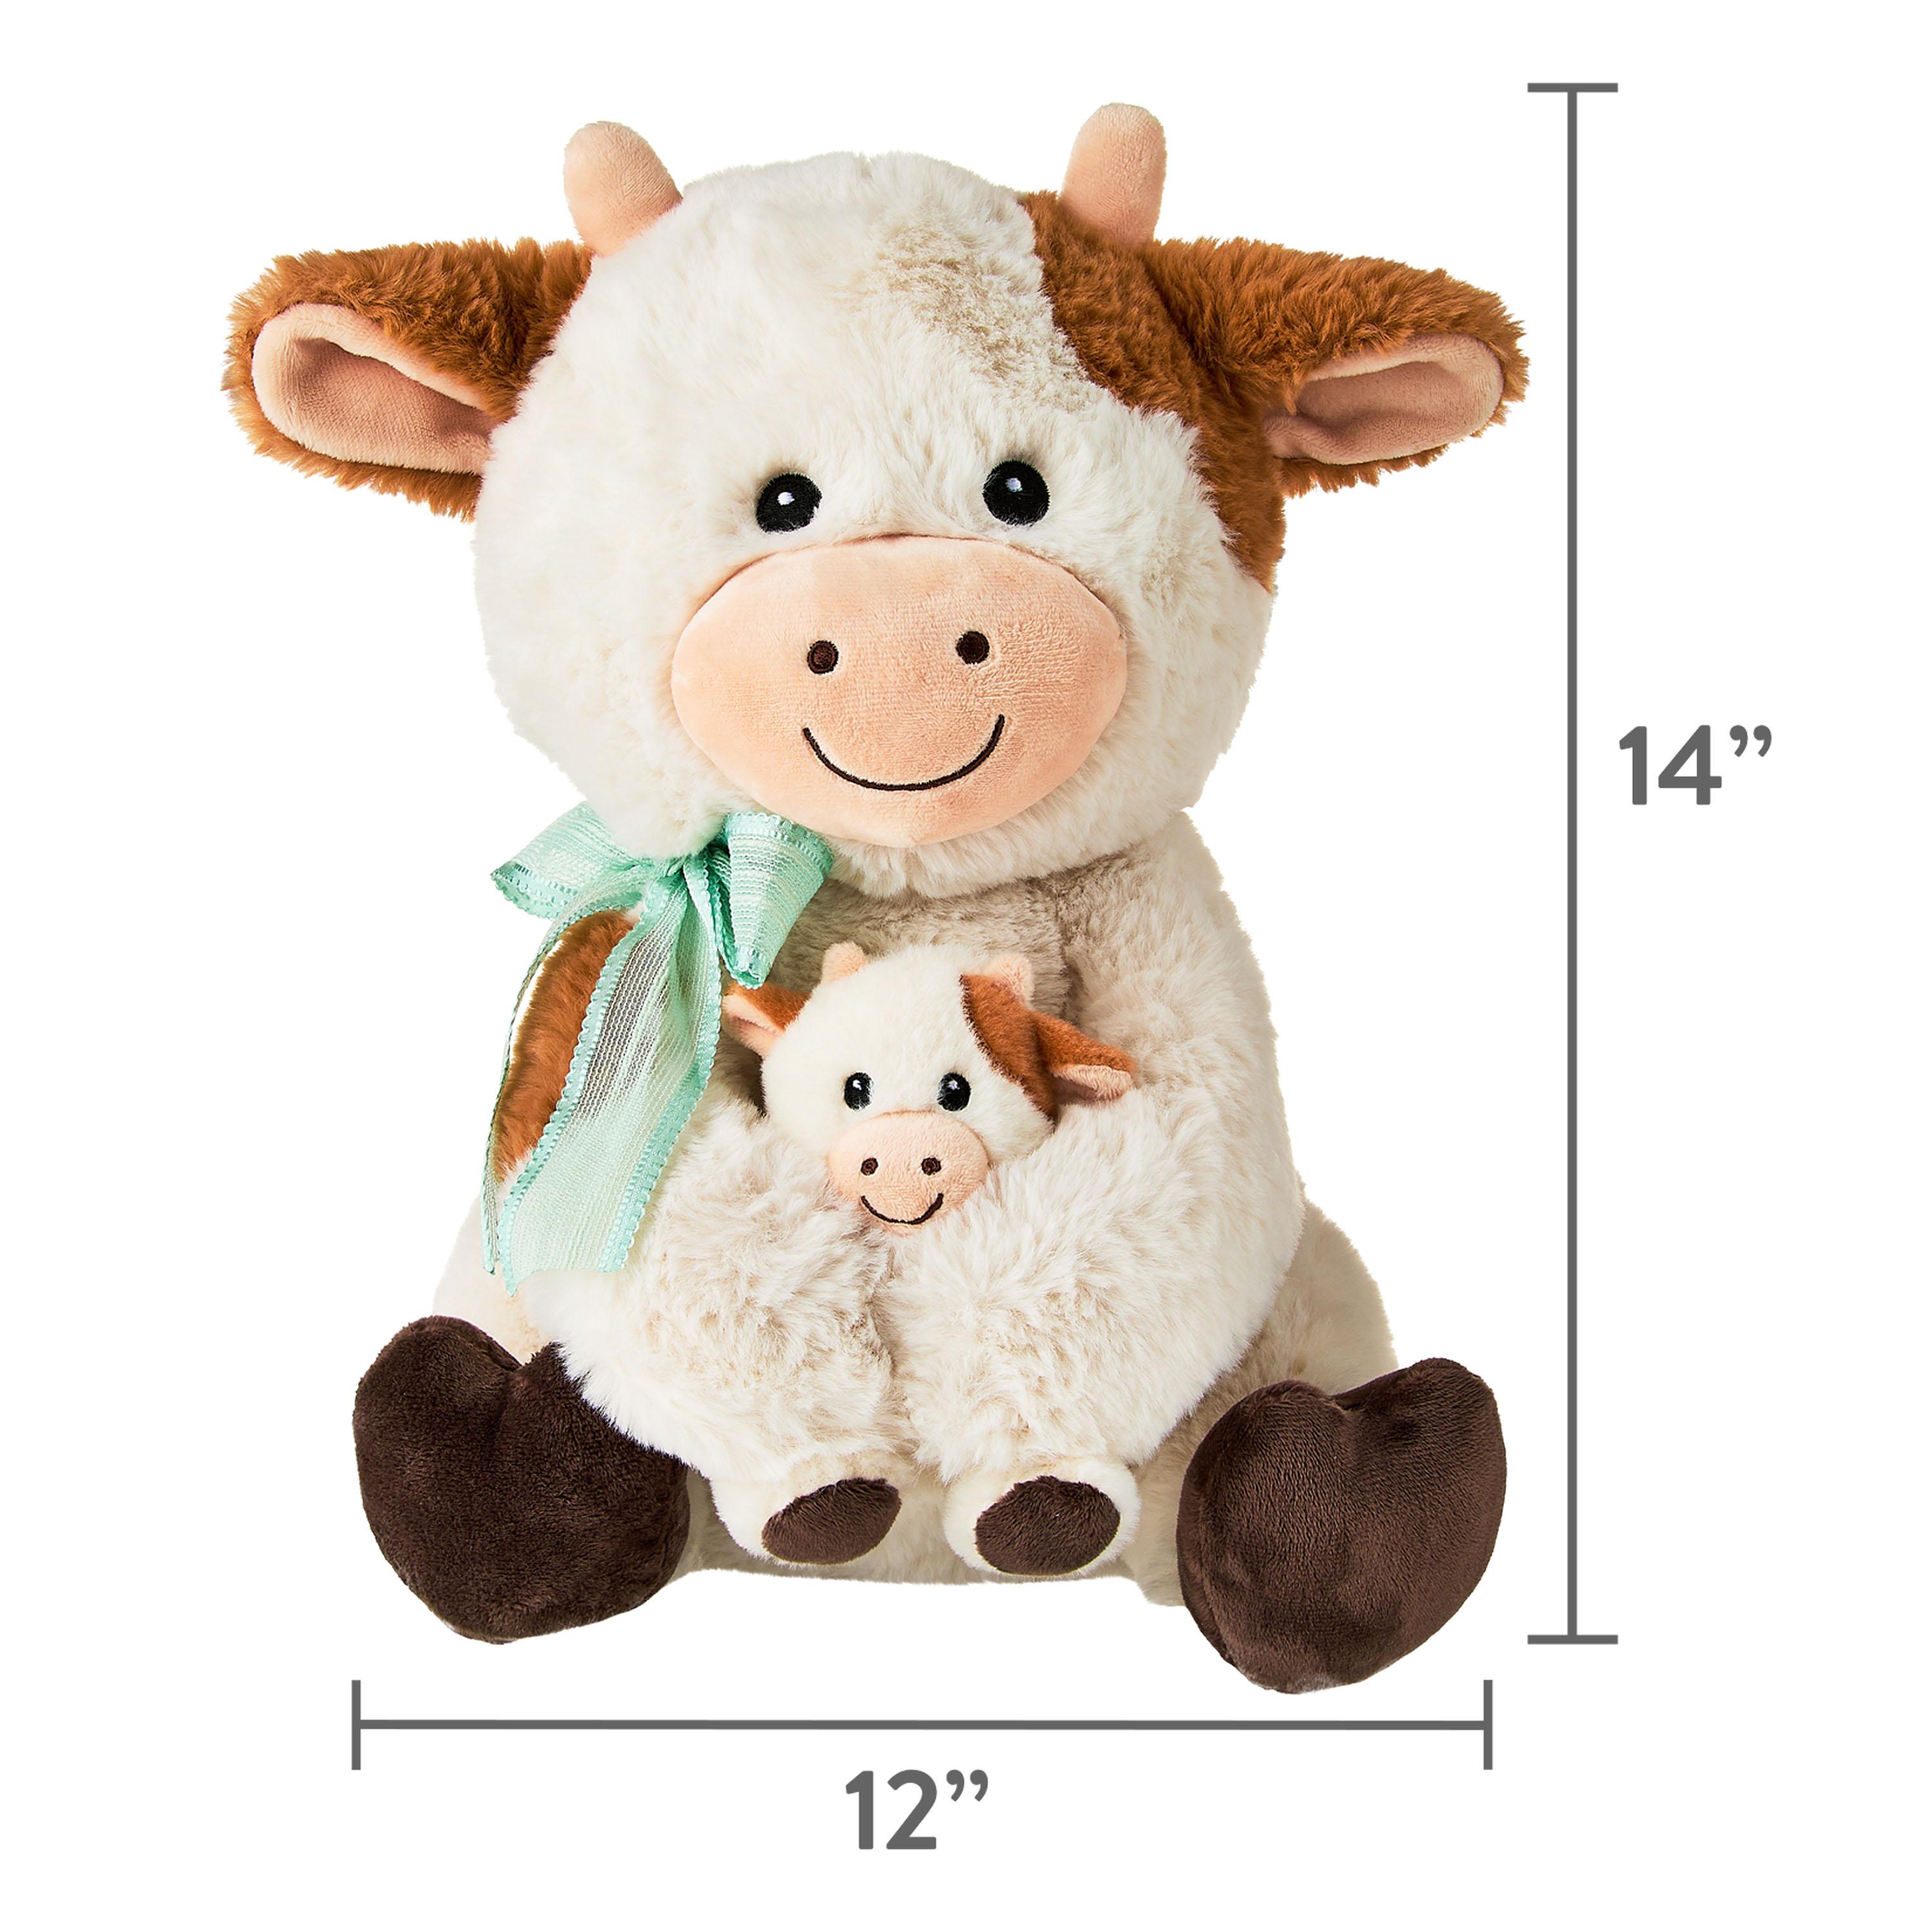 Mother's Day Mommy and Me Cow Plush, 13", by Way To Celebrate,assembled product height 13.5inch, for 3 Year and up - image 5 of 5